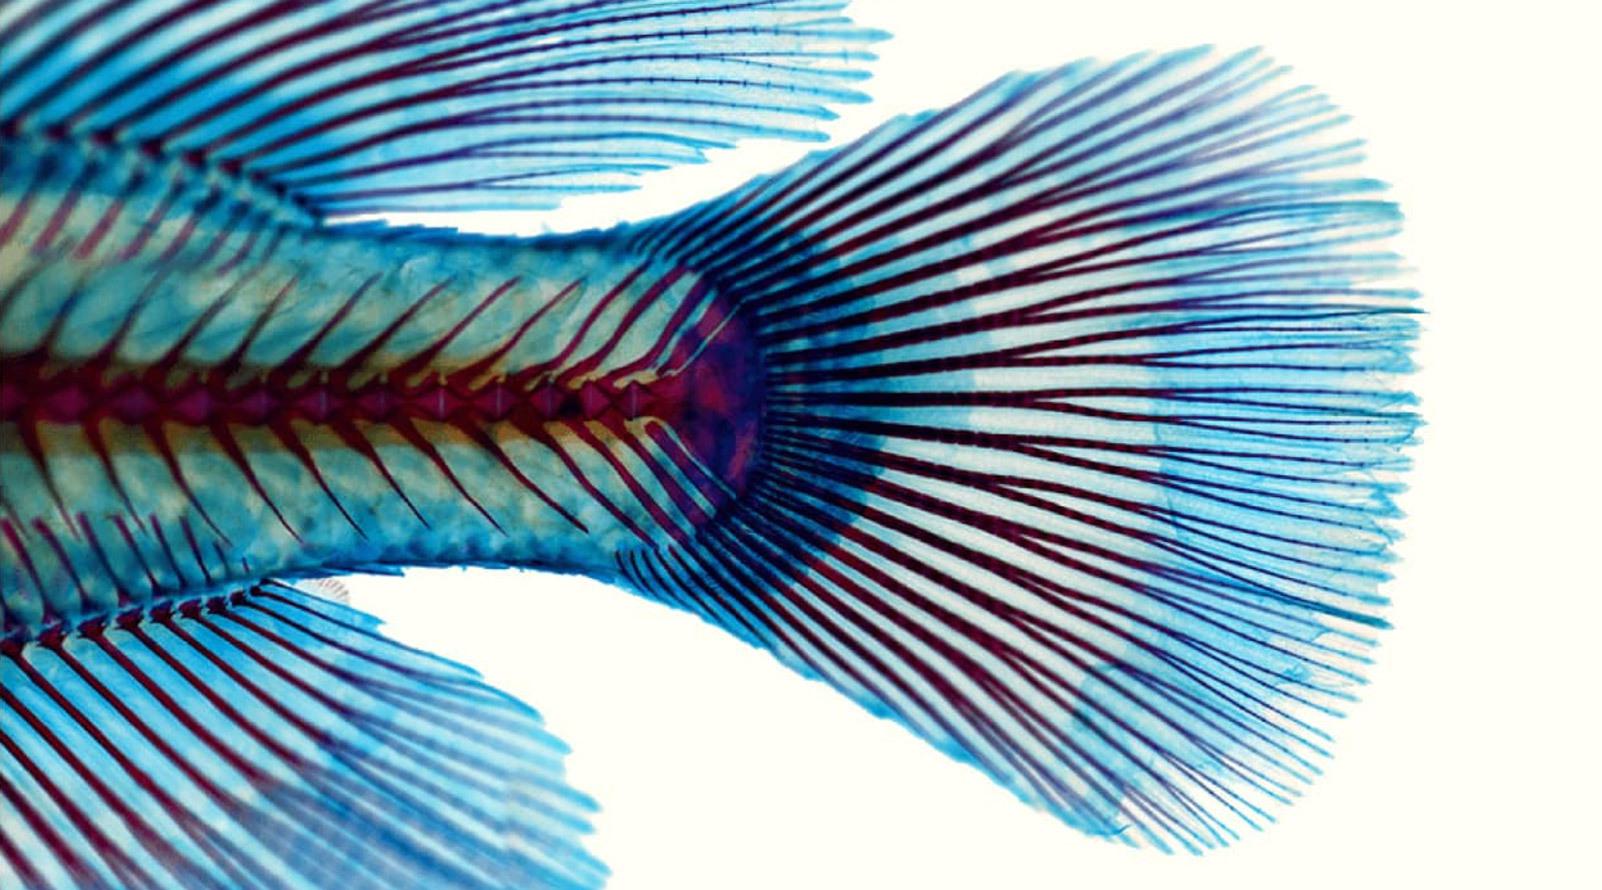 Closeup of the back fins a and tail of a fish as seen underneath a microscope